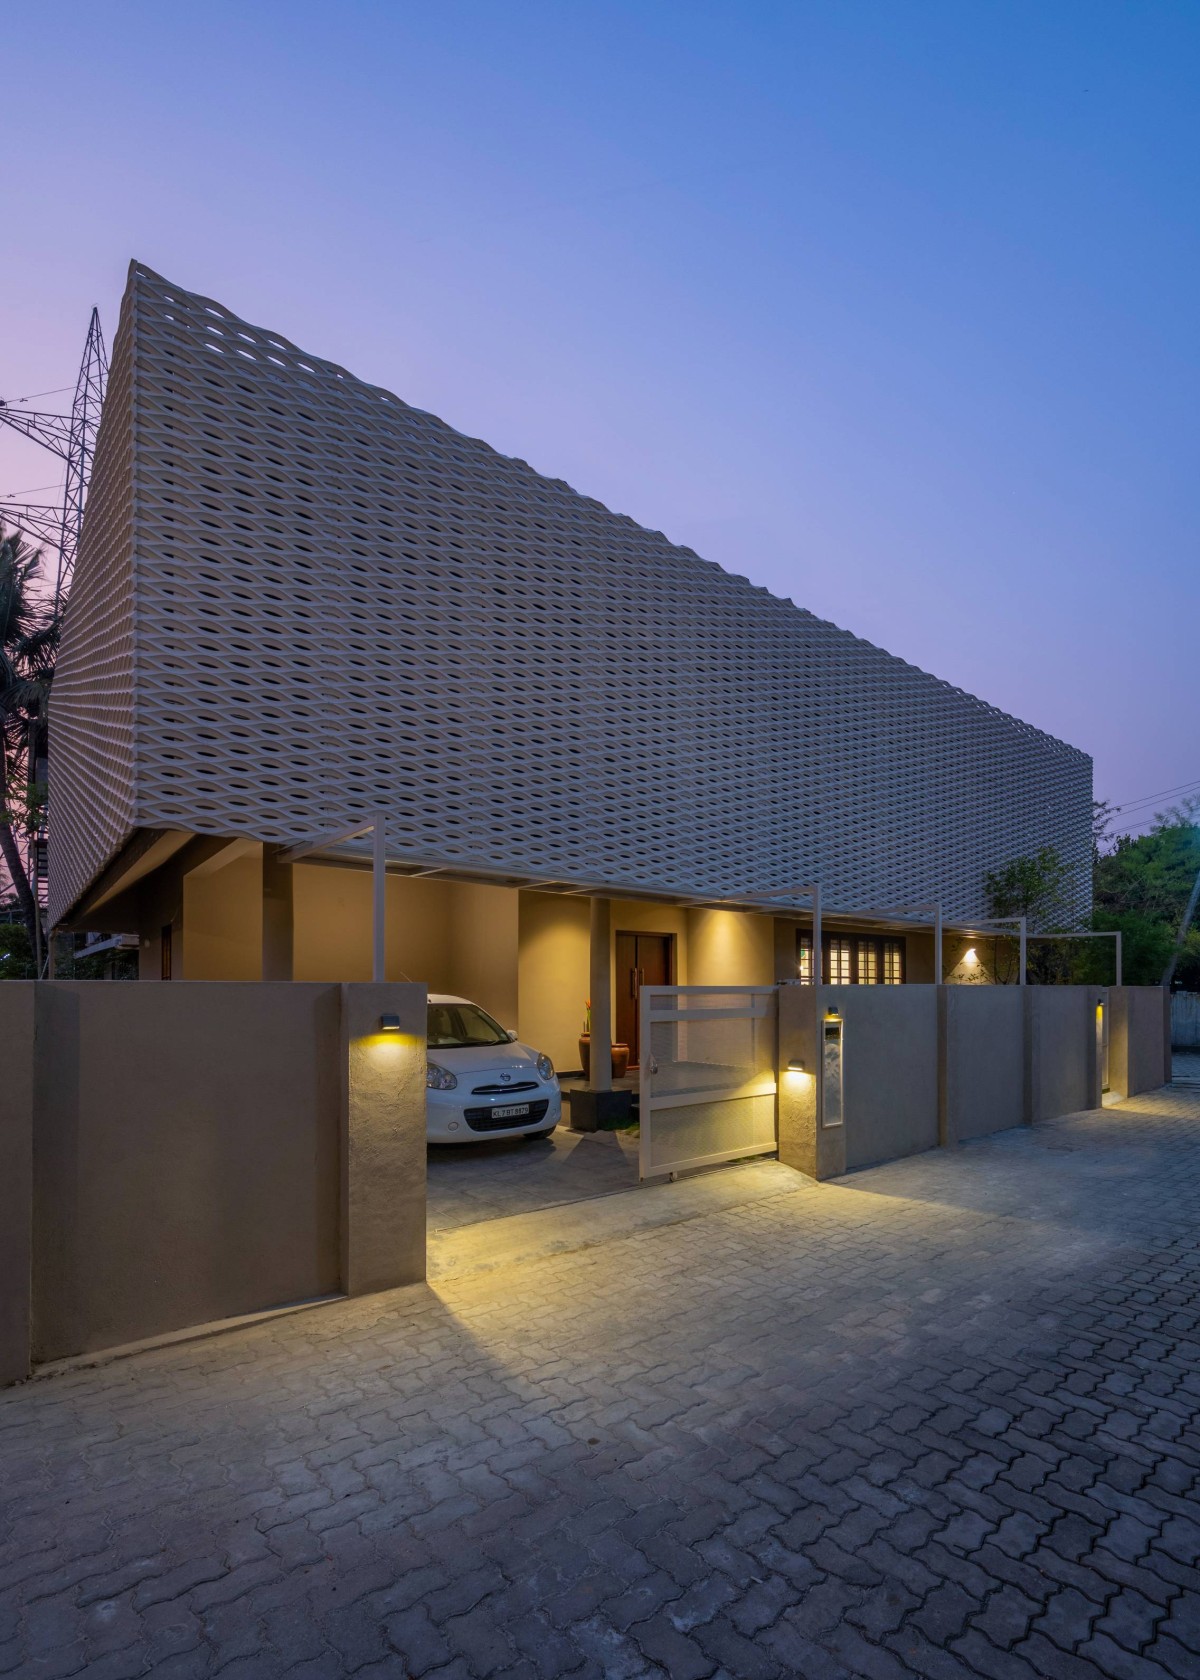 Exterior View Of SUGHOSHA - The Bespoke House by Illusion Architecture